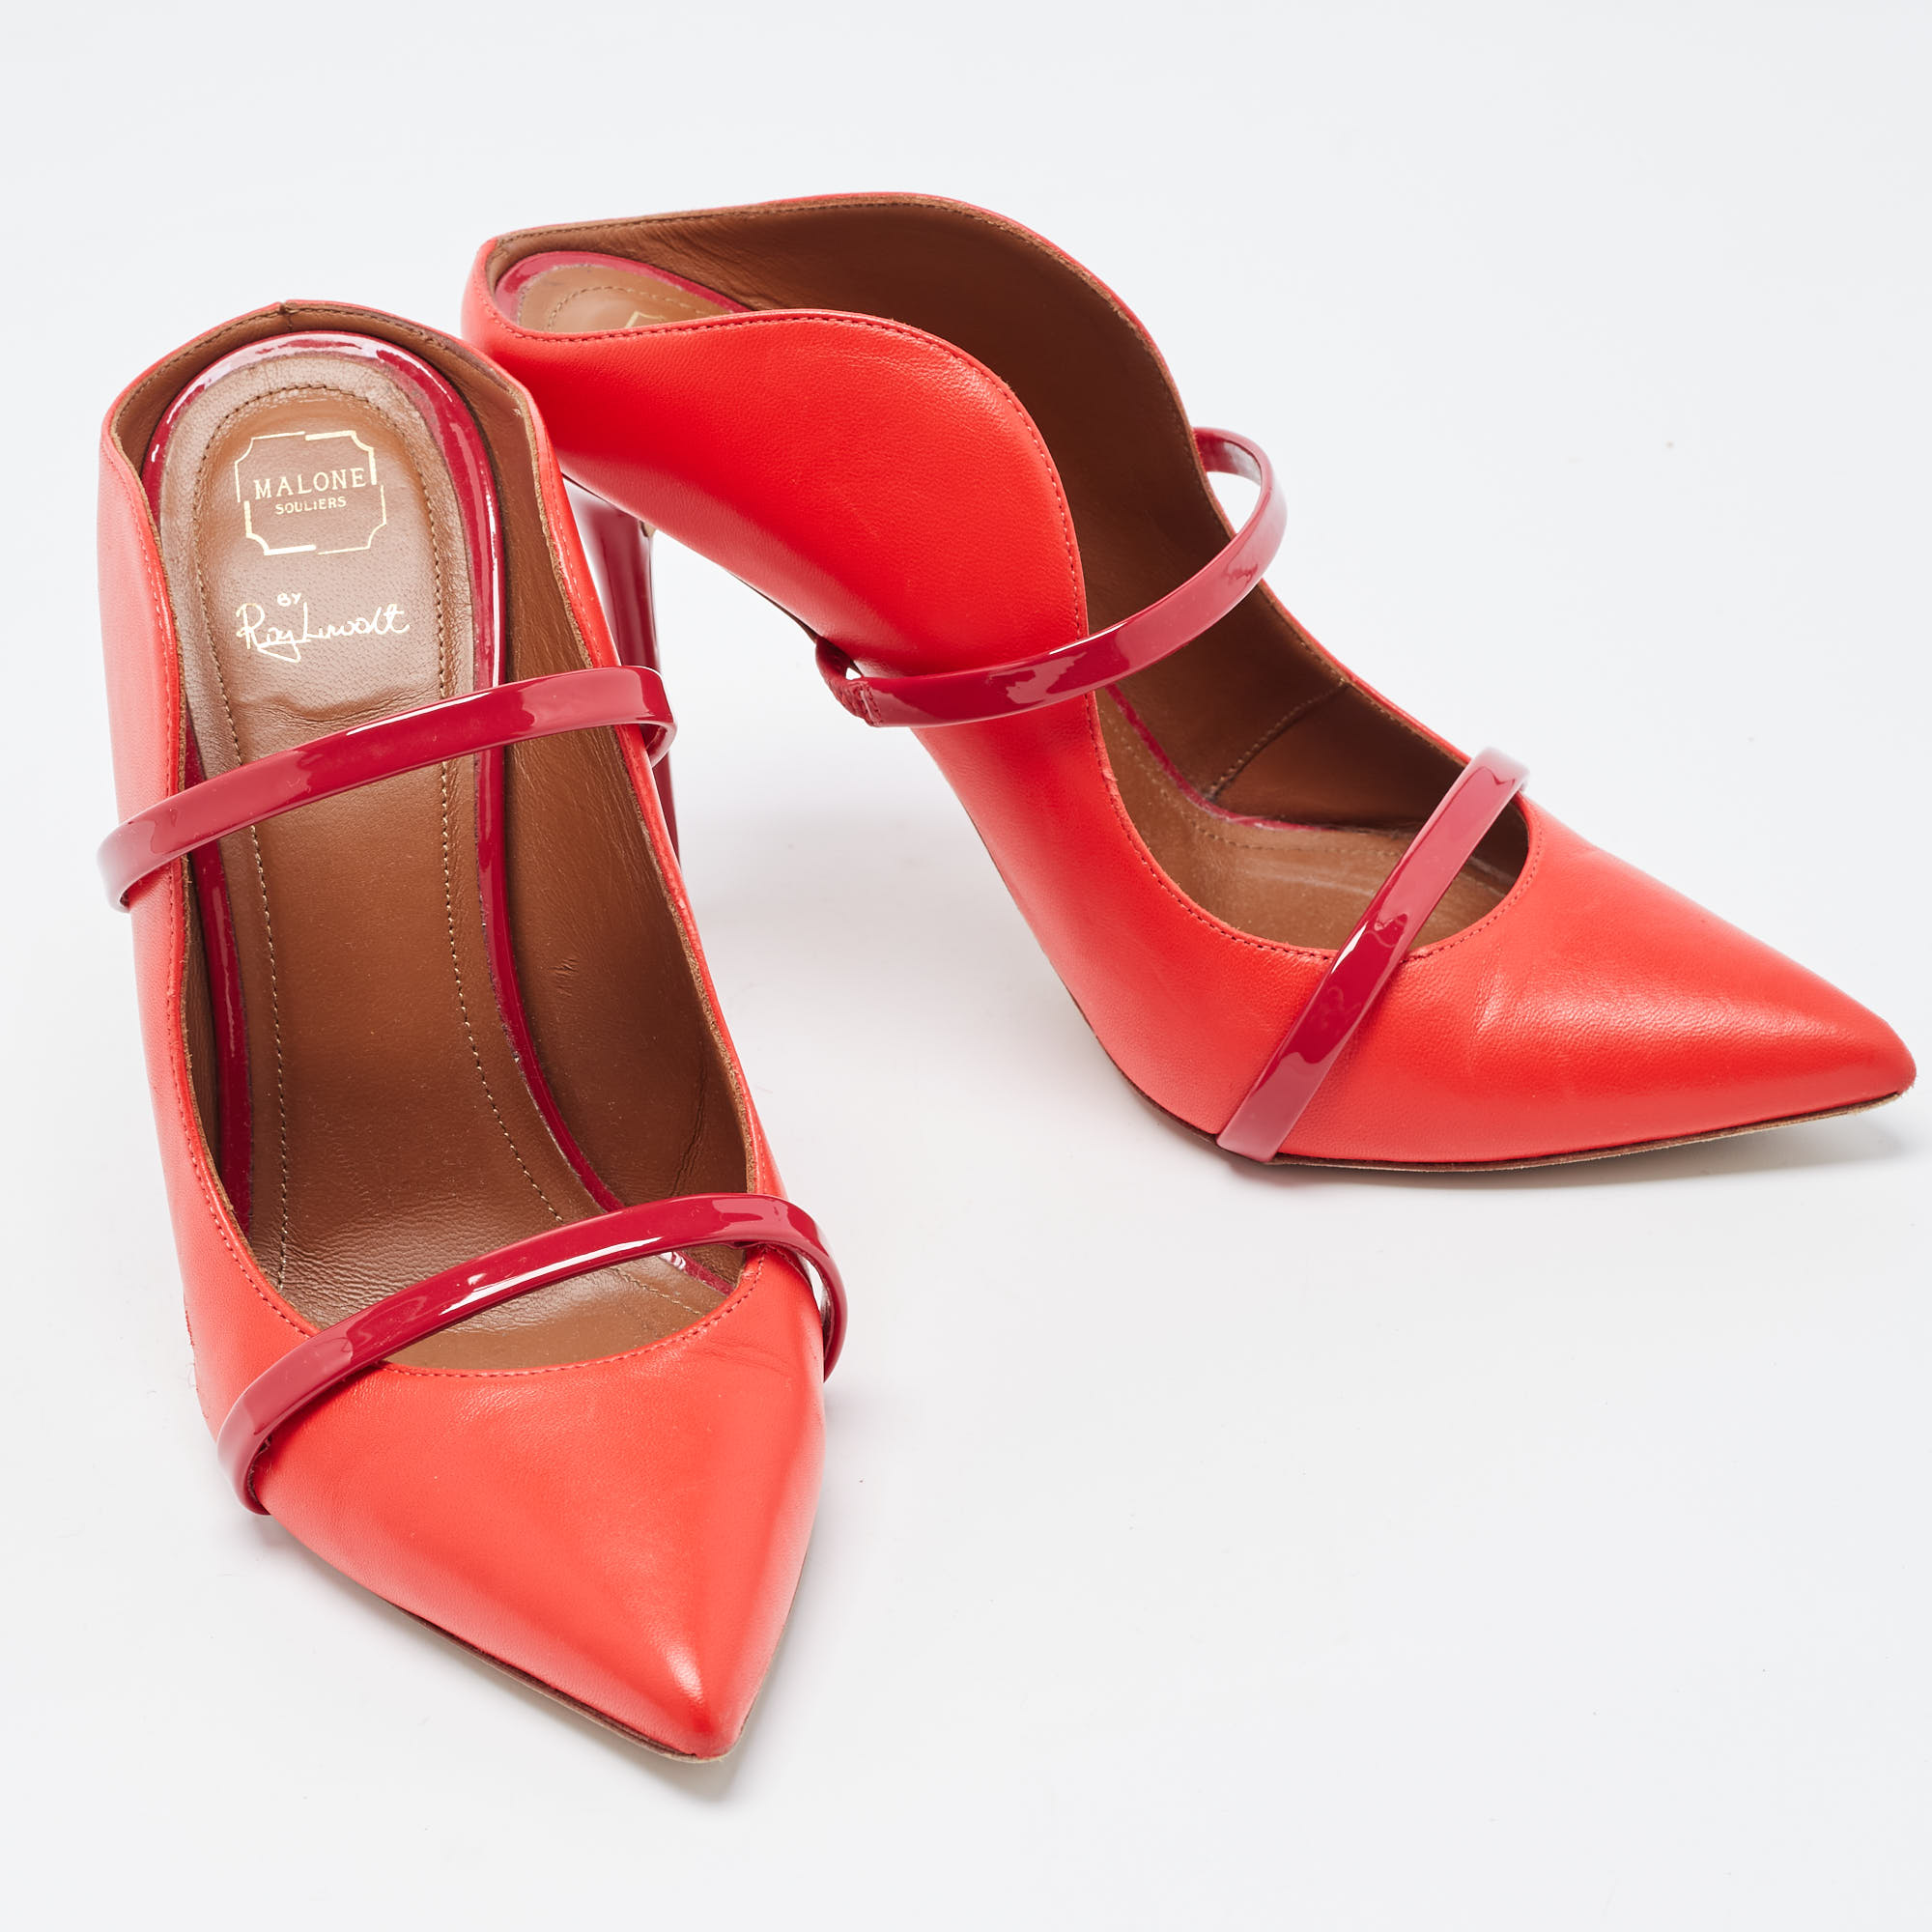 Malone Souliers Red Leather Maureen Mules Size 38